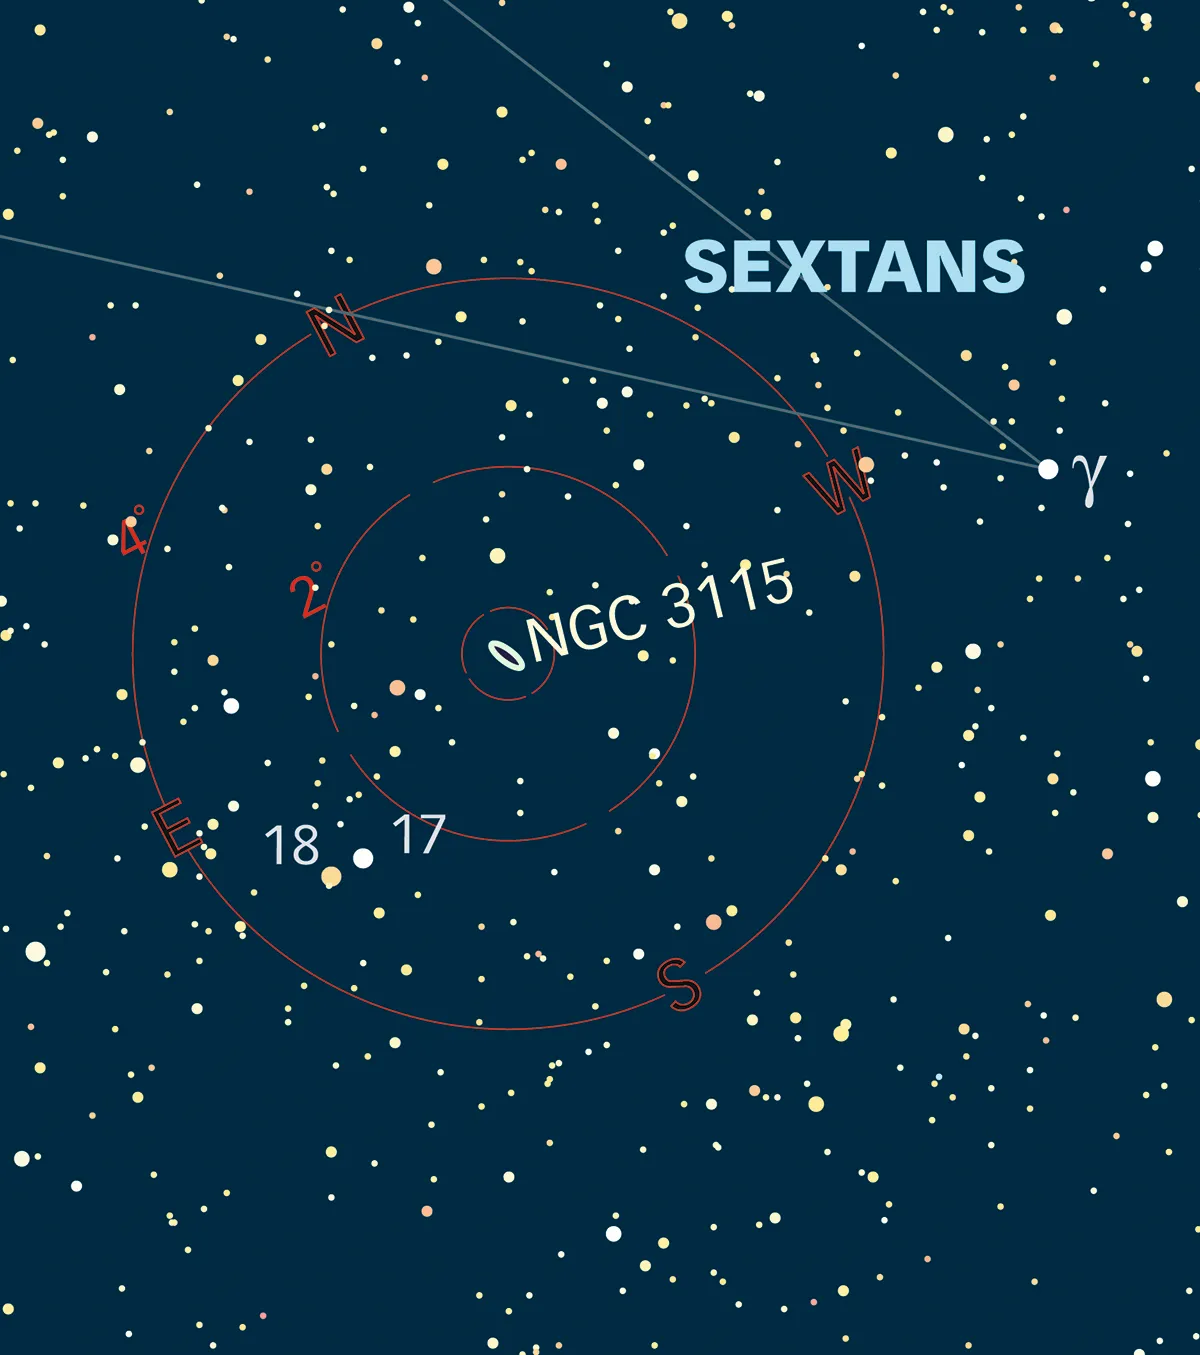 Chart showing the location of galaxy NGC 3115